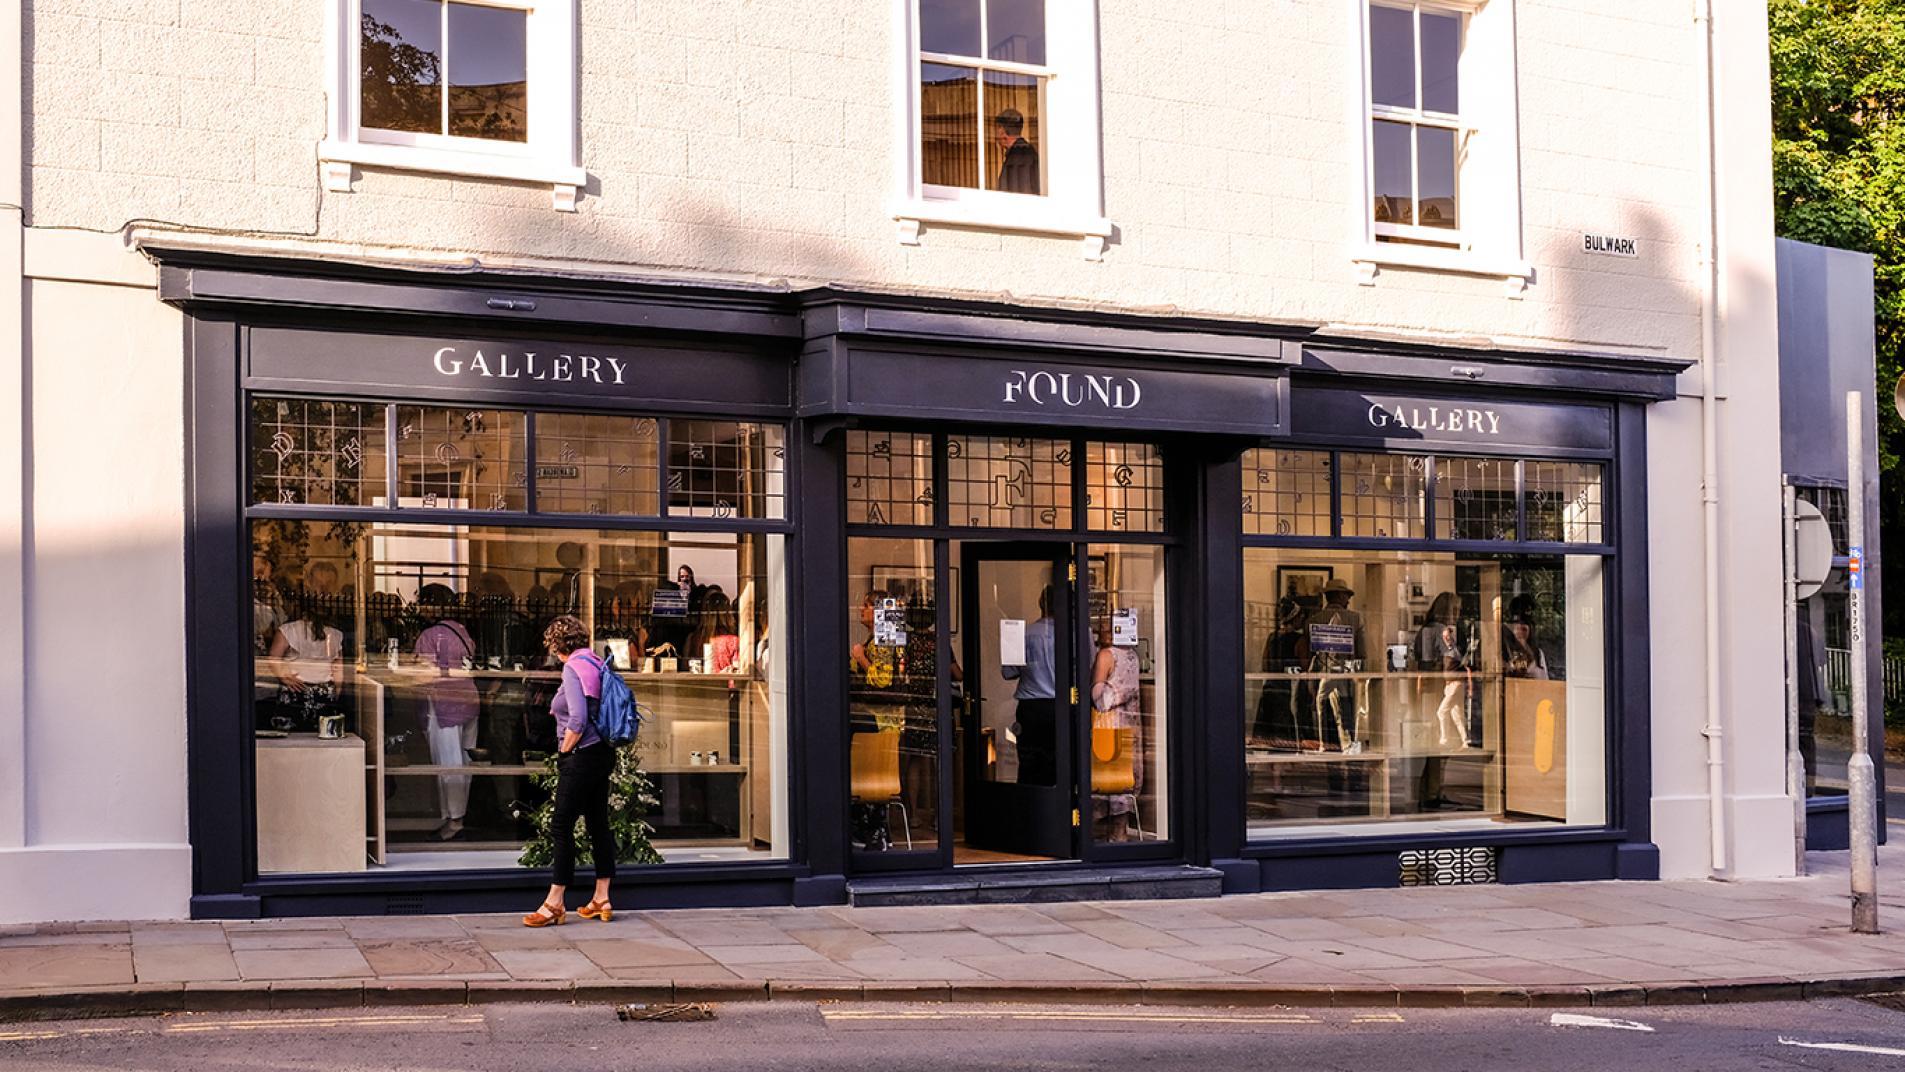 Image of Found Gallery in Brecon